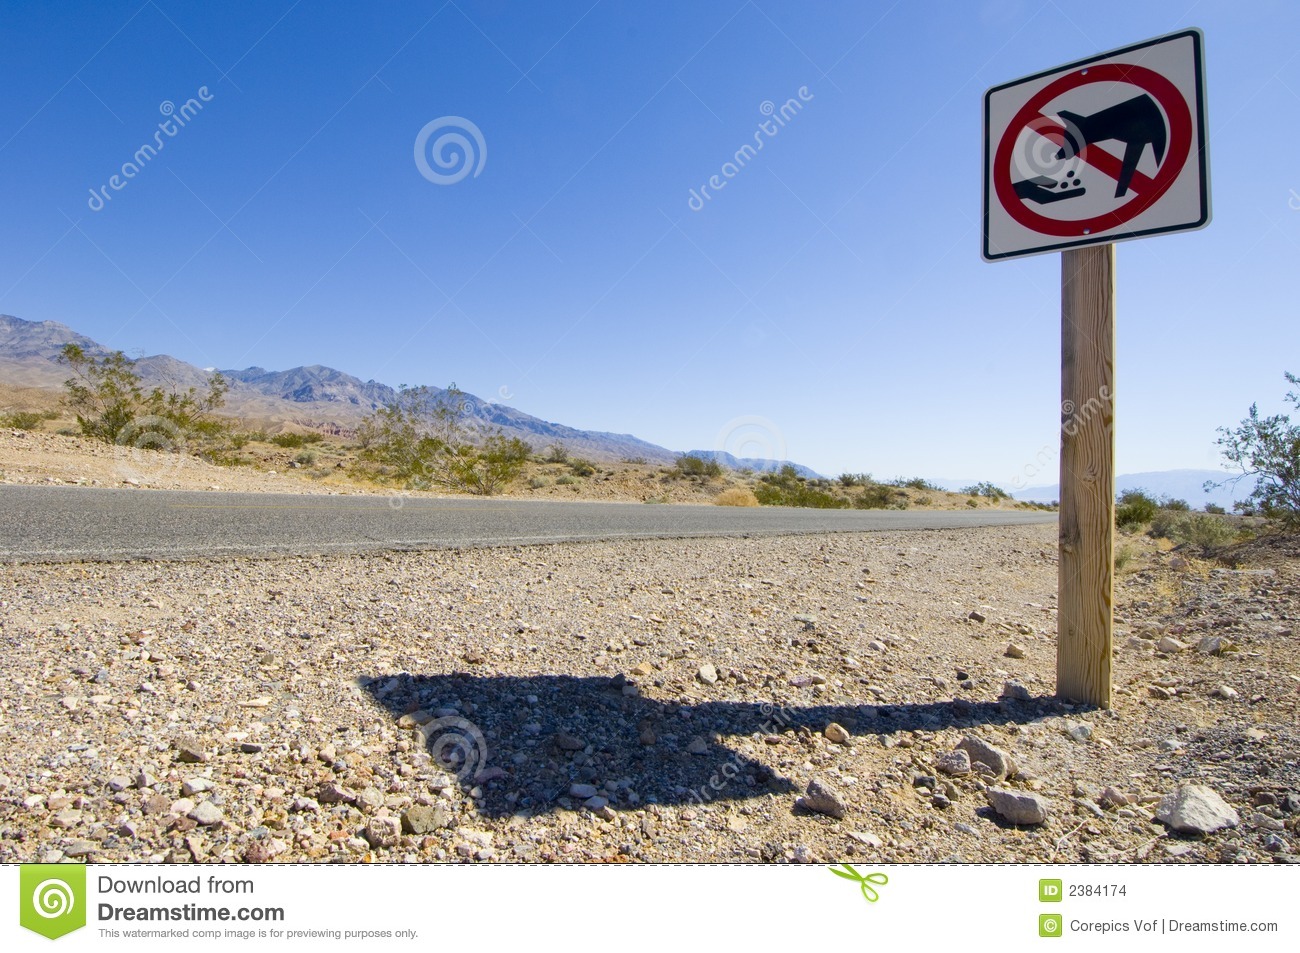 Death Valley Stock Images   Image  2384174